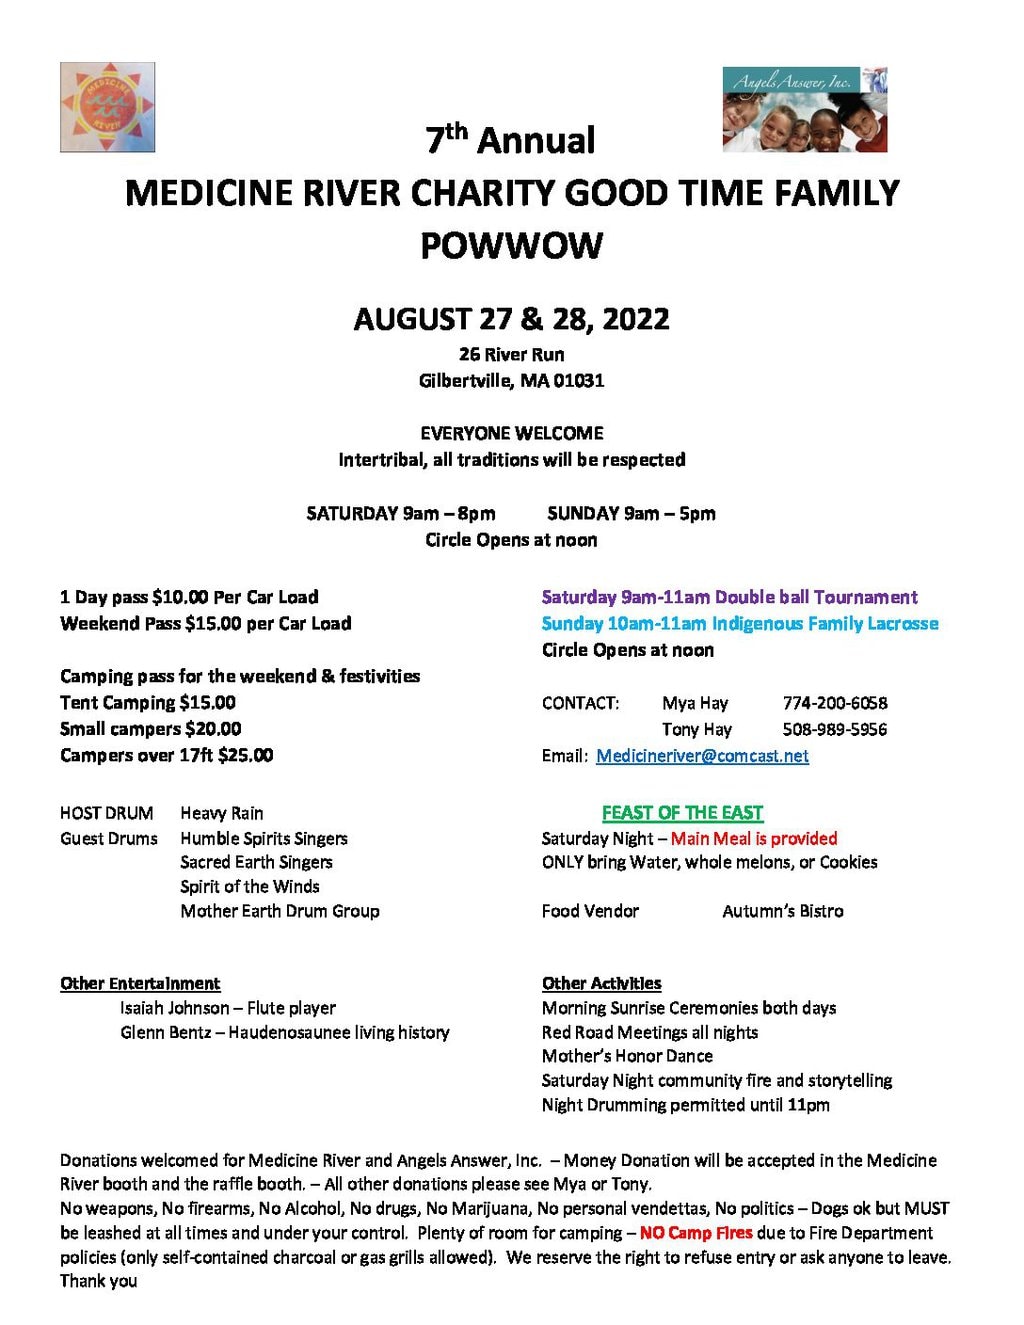 Medicine River Good Time Family Charity Pow Wow 2022